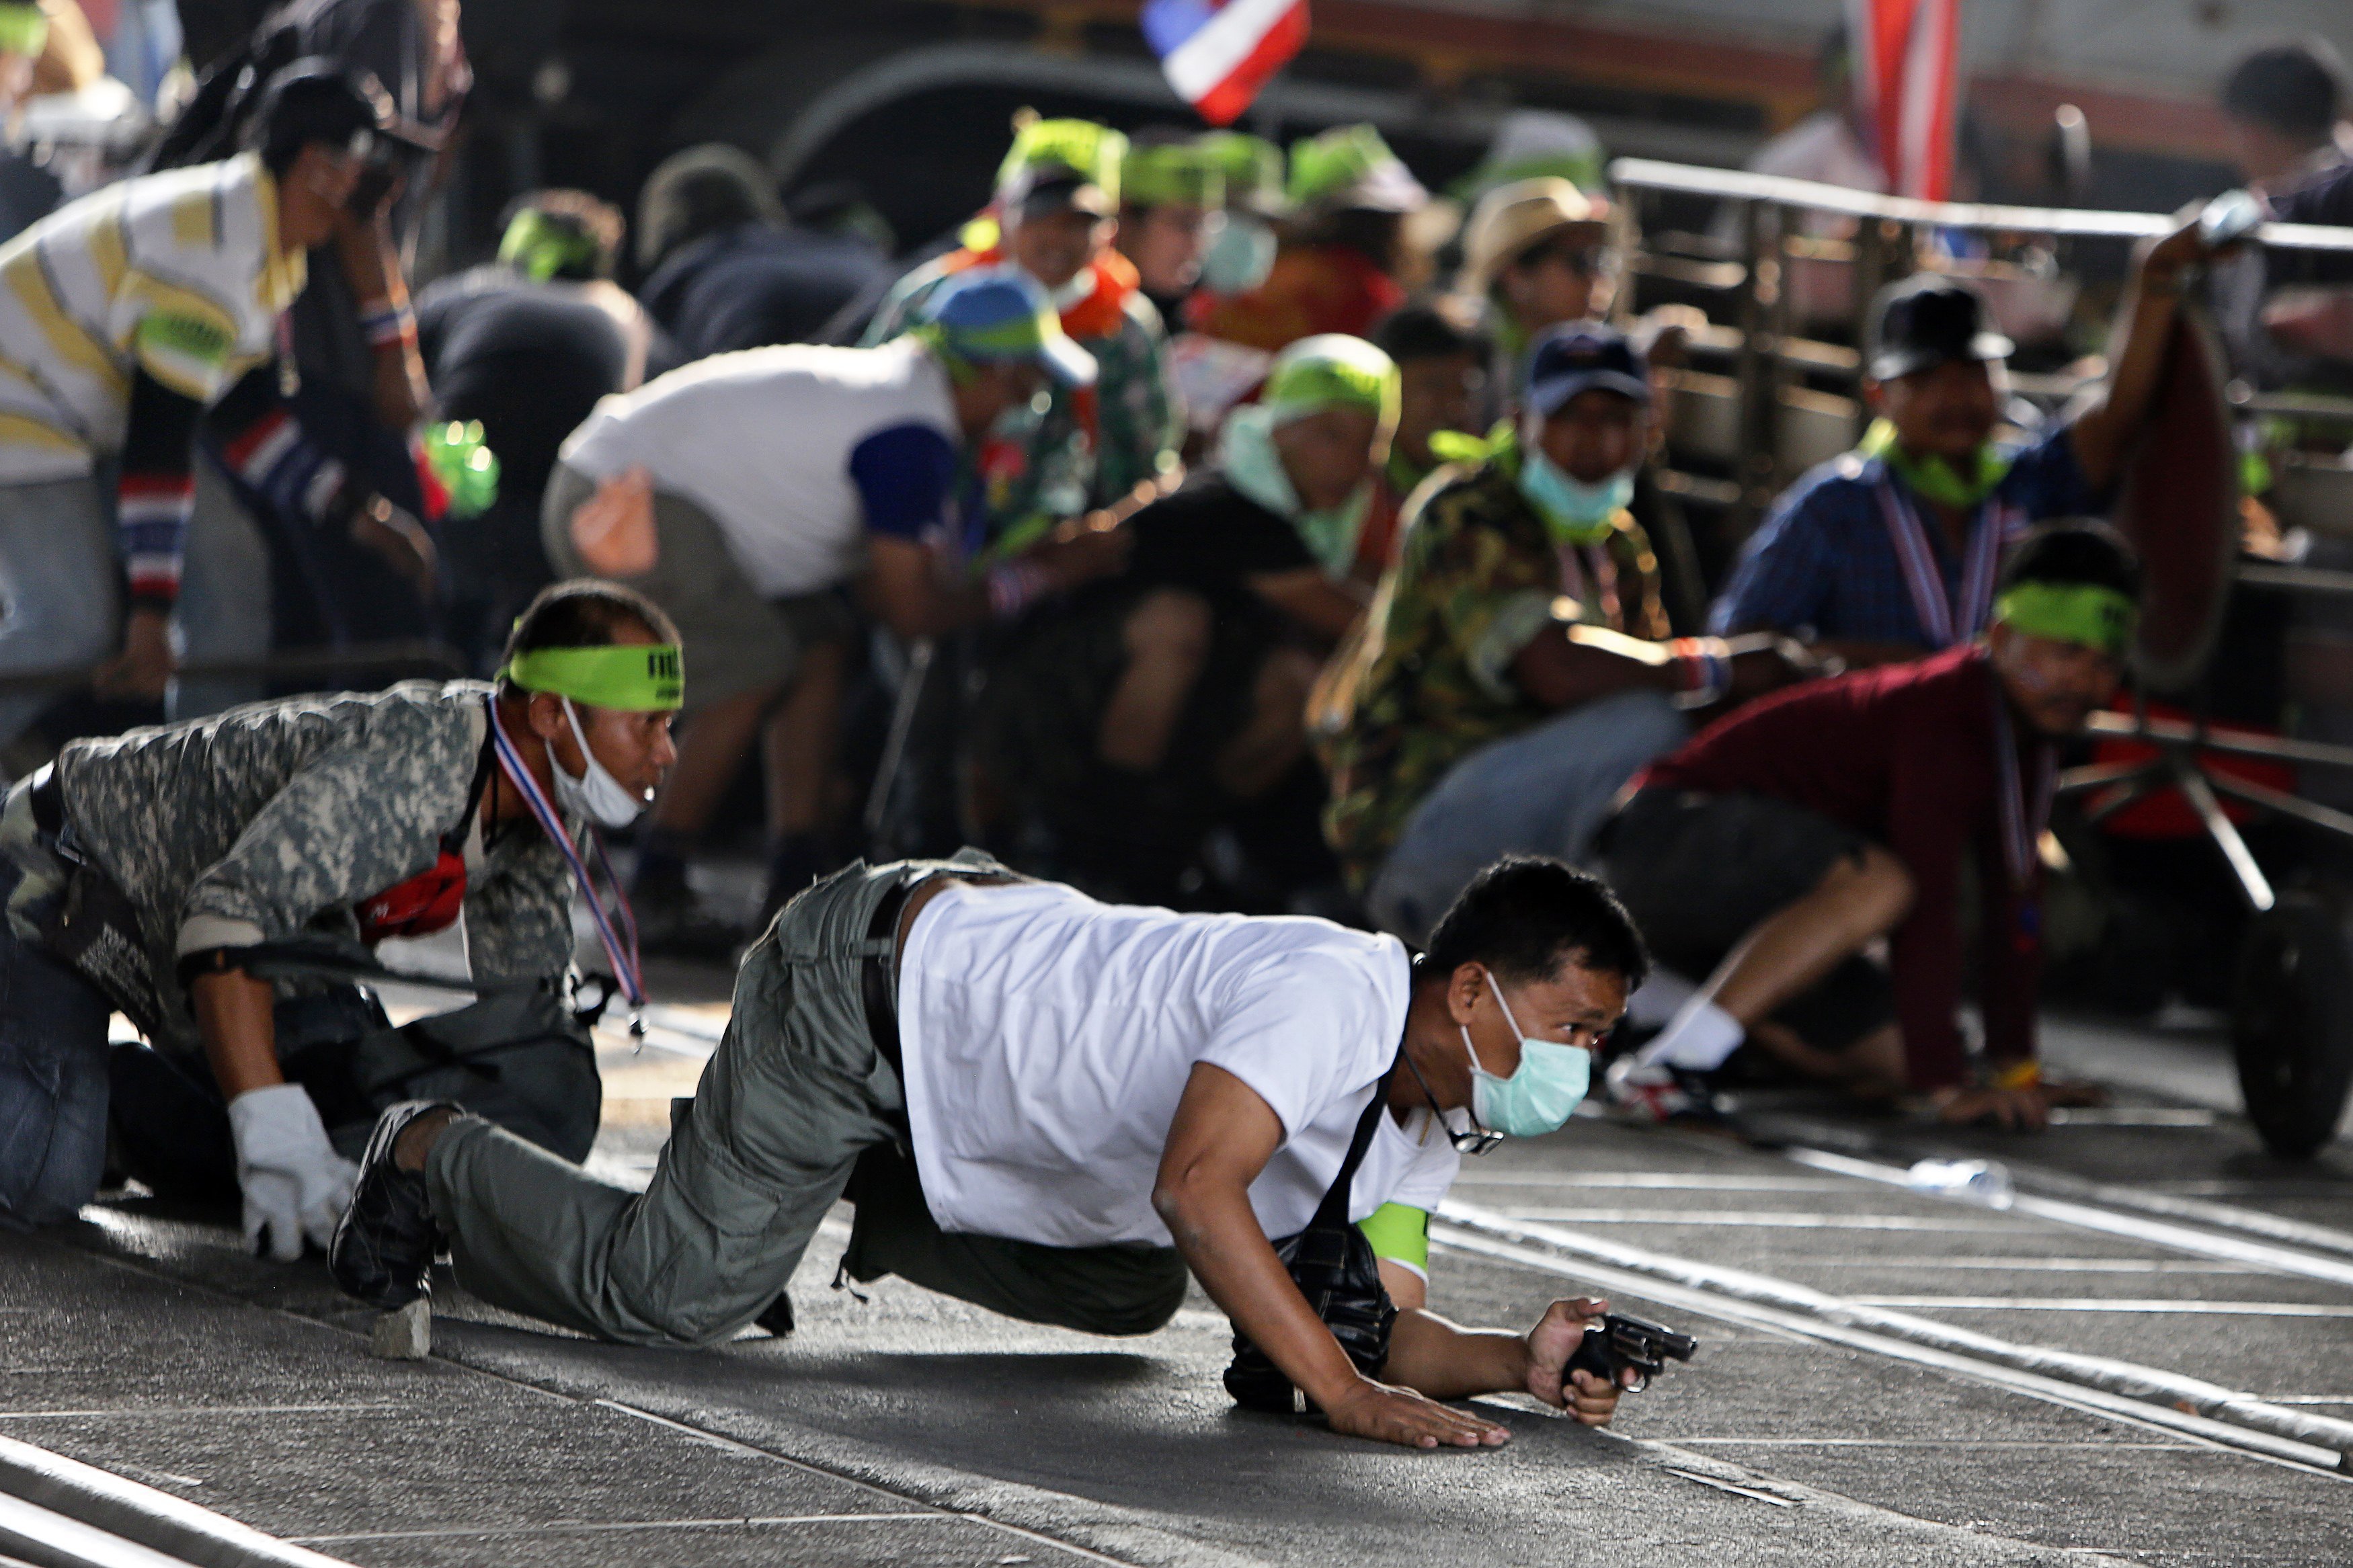 An anti-government protester crawls with his pistol during a gunfight between supporters and opponents of Thailand's government near Laksi district office in Bangkok Feb. 1, 2014. (Nir Elias / Reuters)